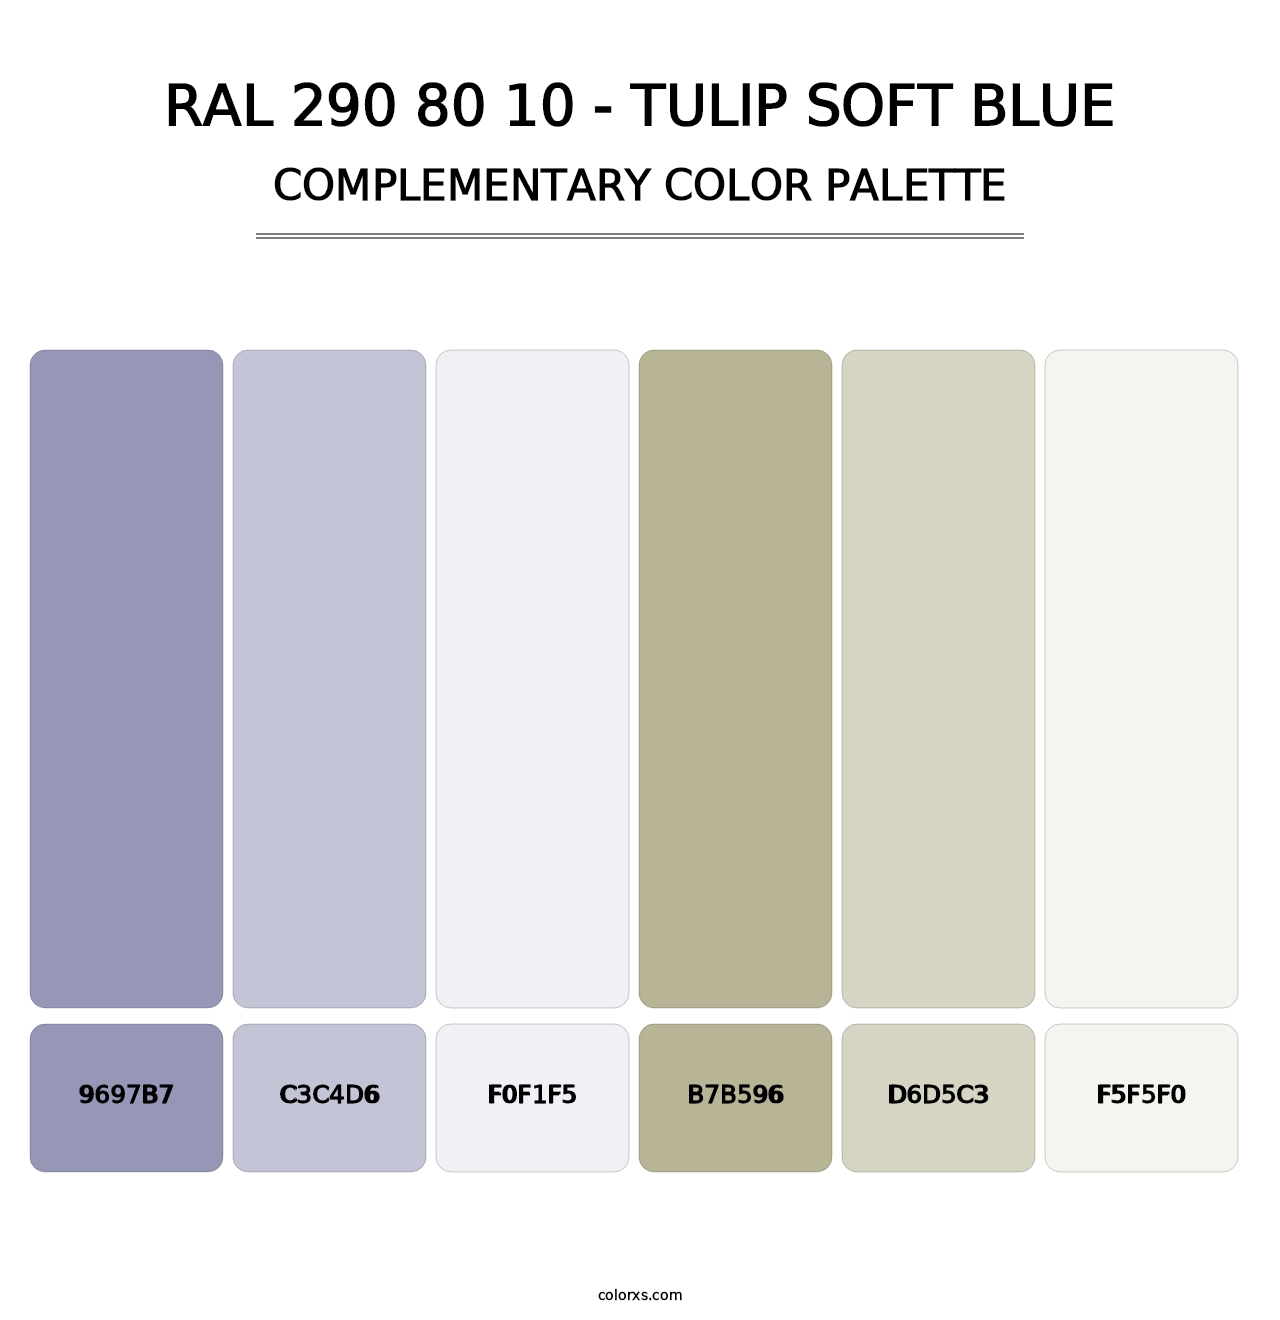 RAL 290 80 10 - Tulip Soft Blue - Complementary Color Palette